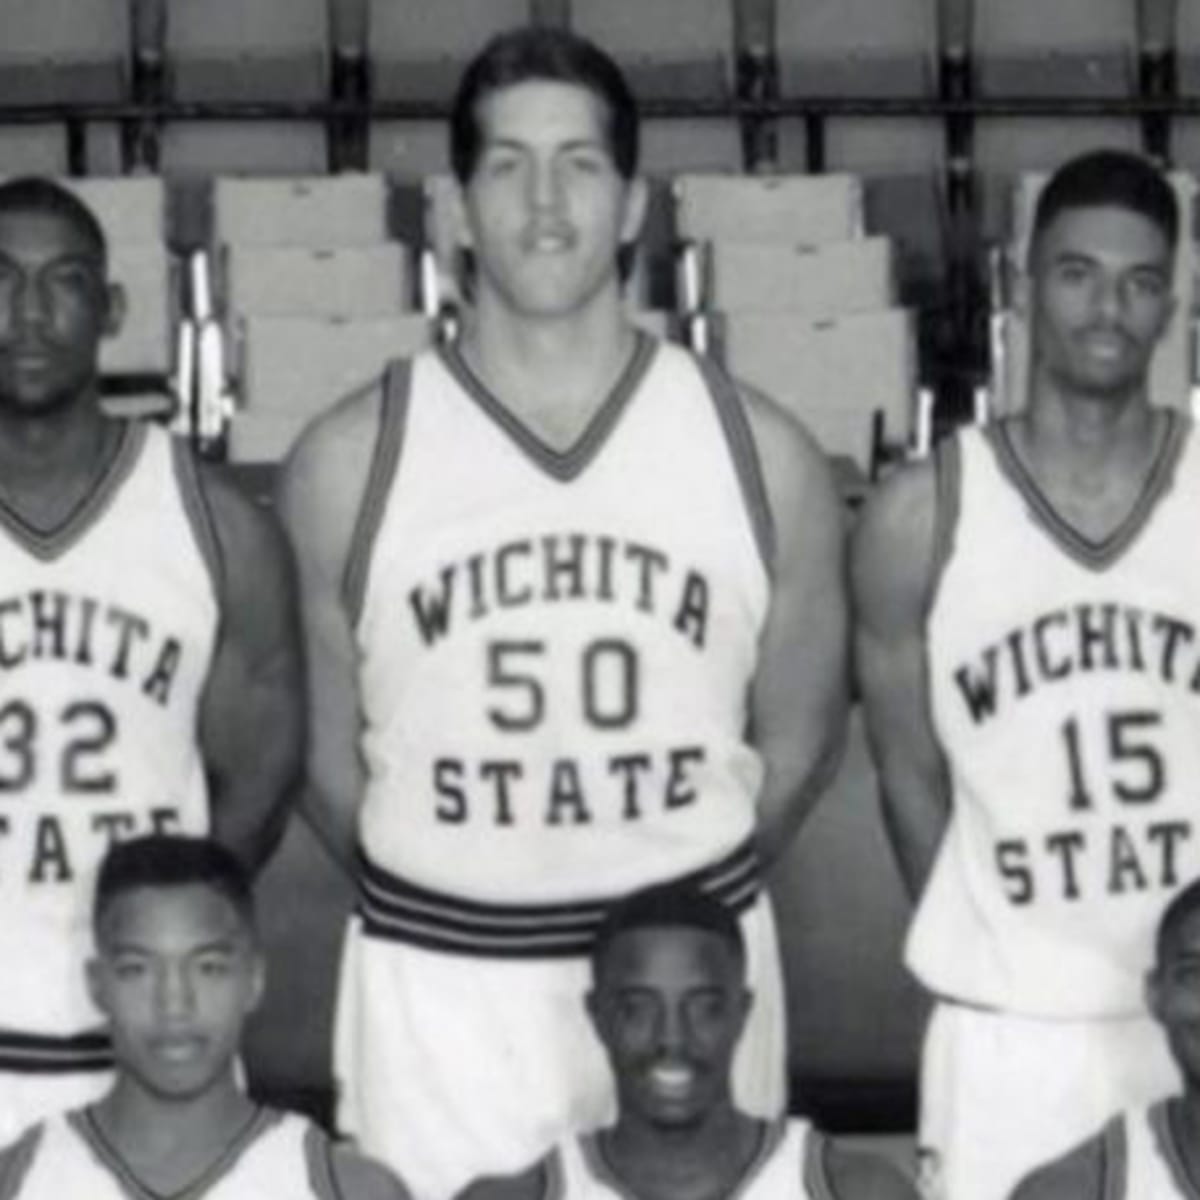 Before He Was A WWE Champion, The Big Show Was A Wichita State